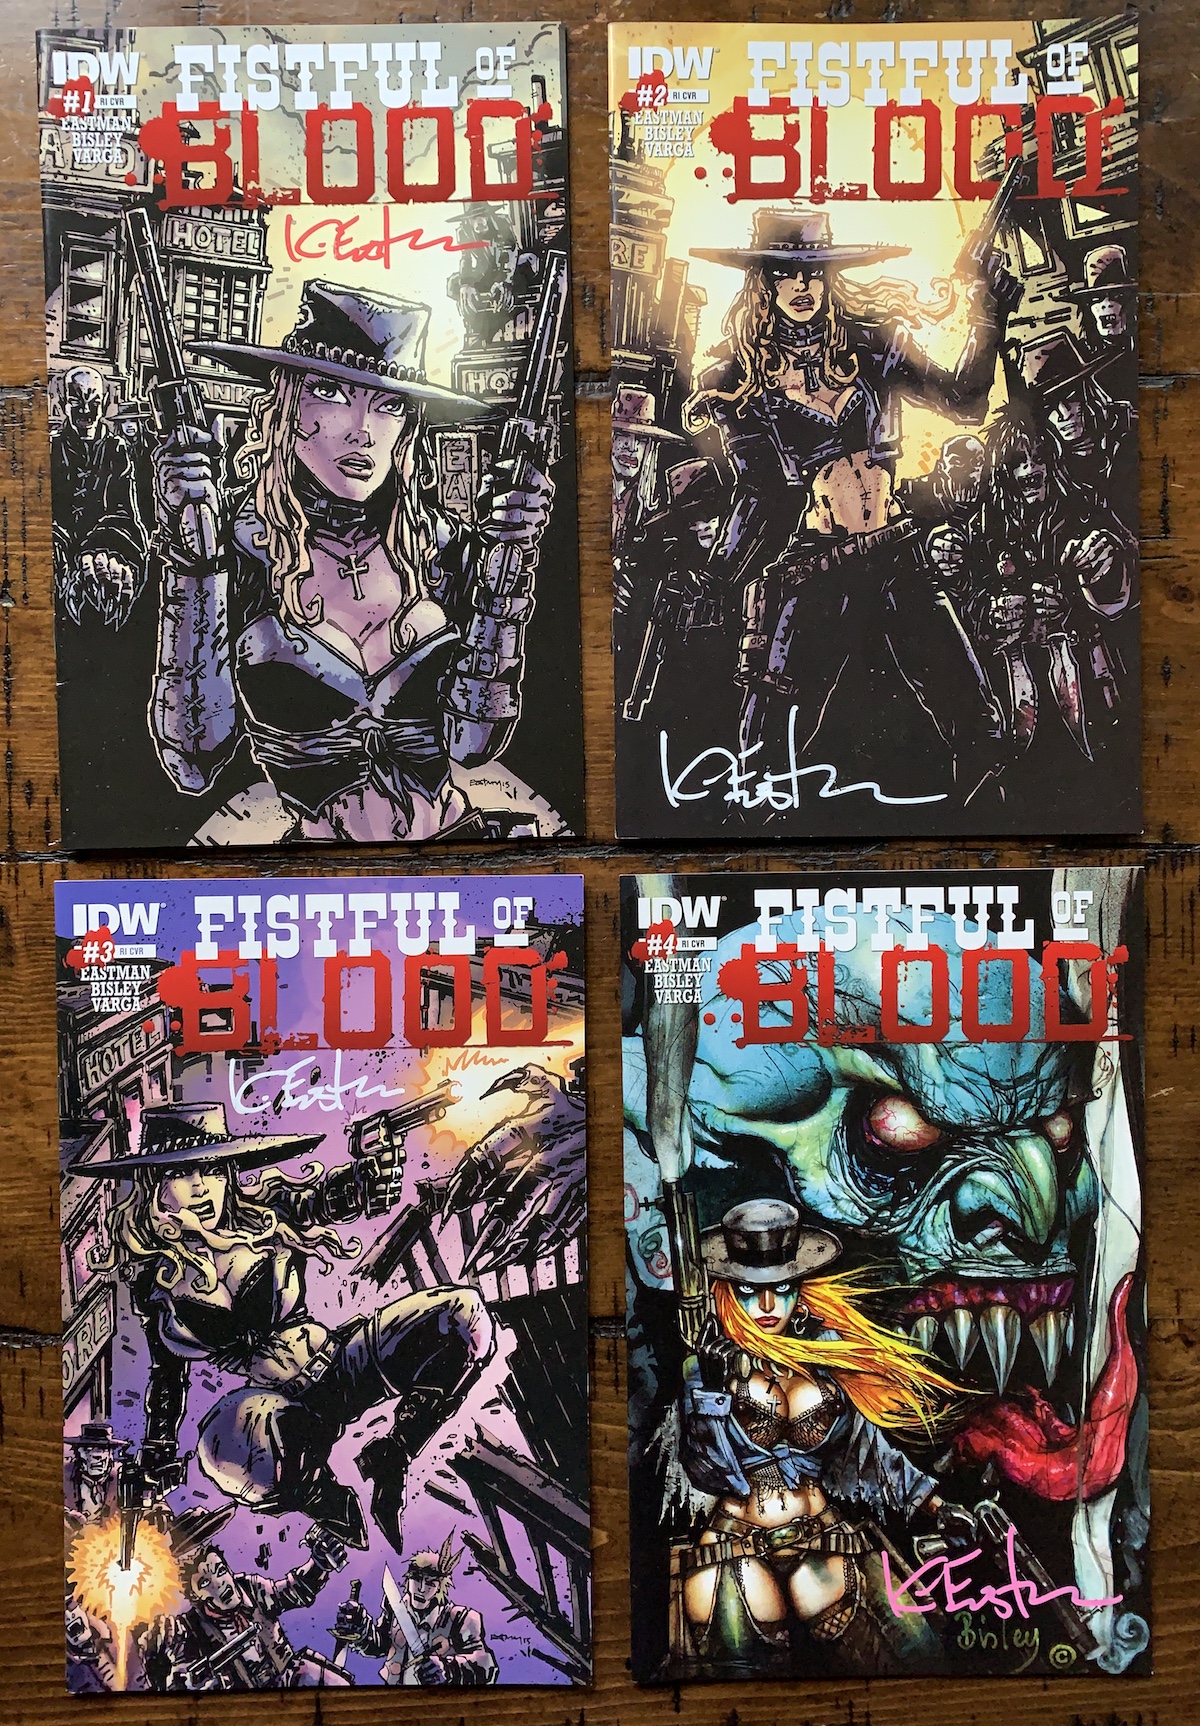 Fistful of Blood RI Covers – Signed Bundle